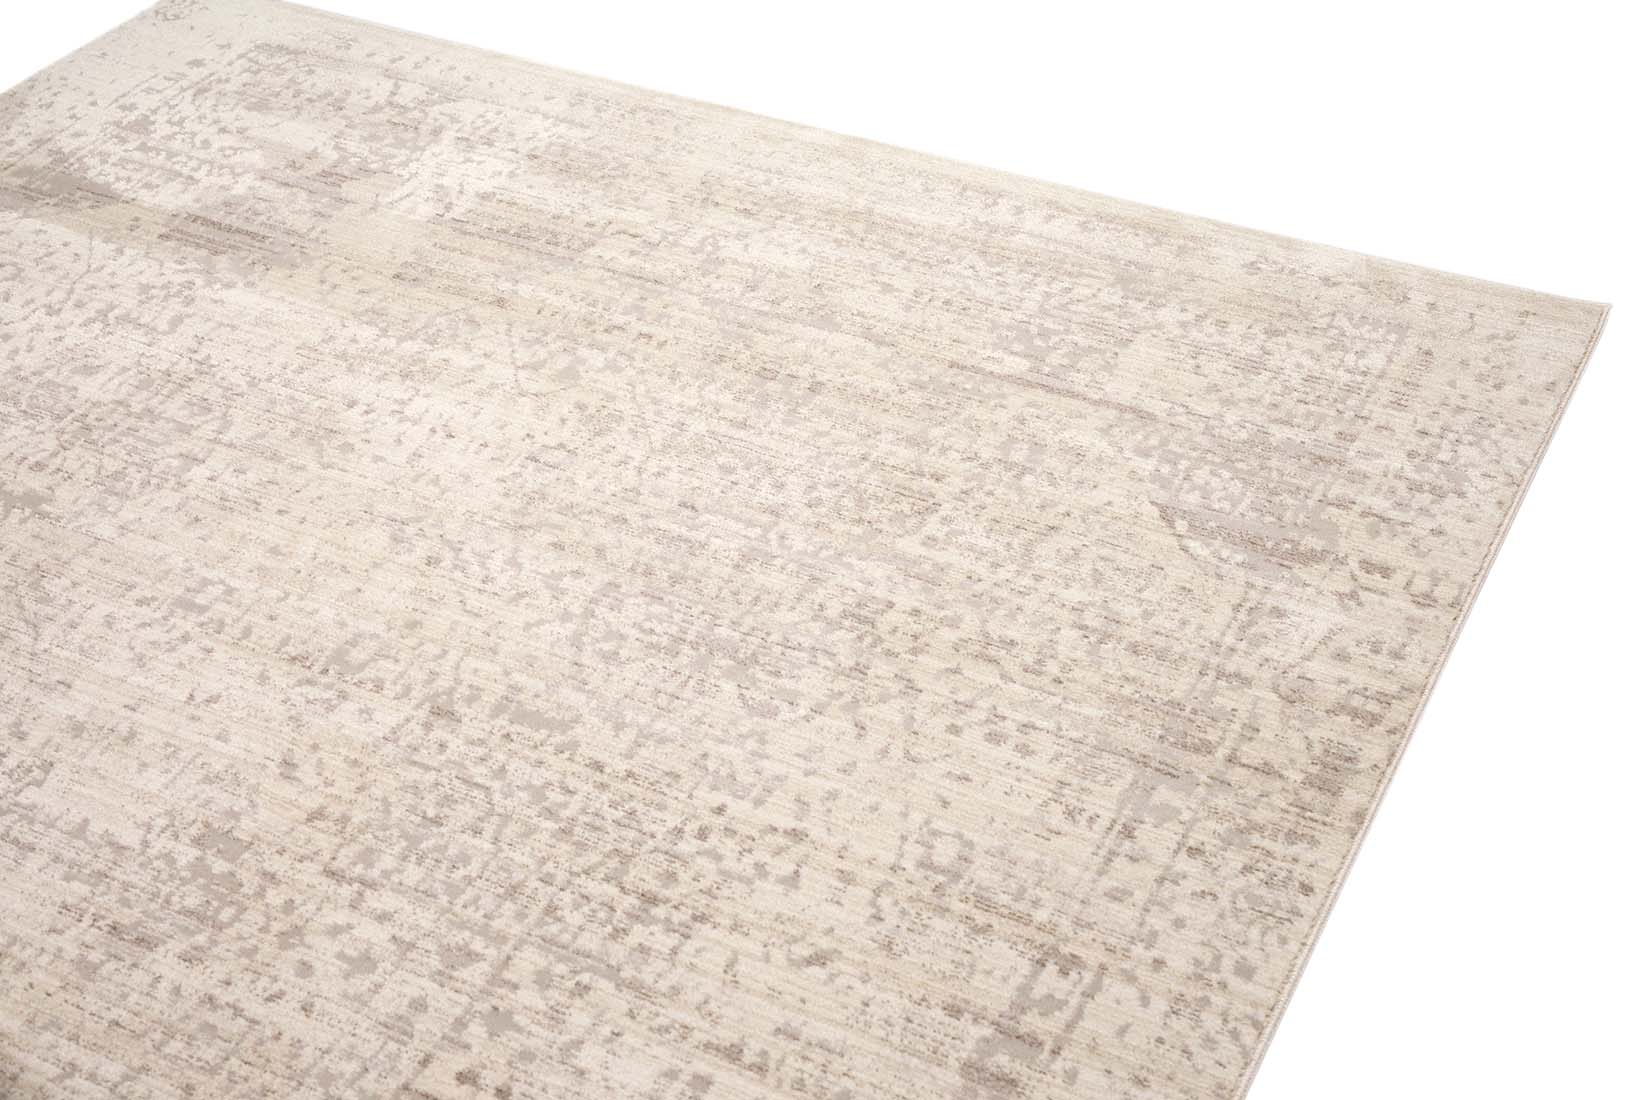 Persian style area rug in grey
